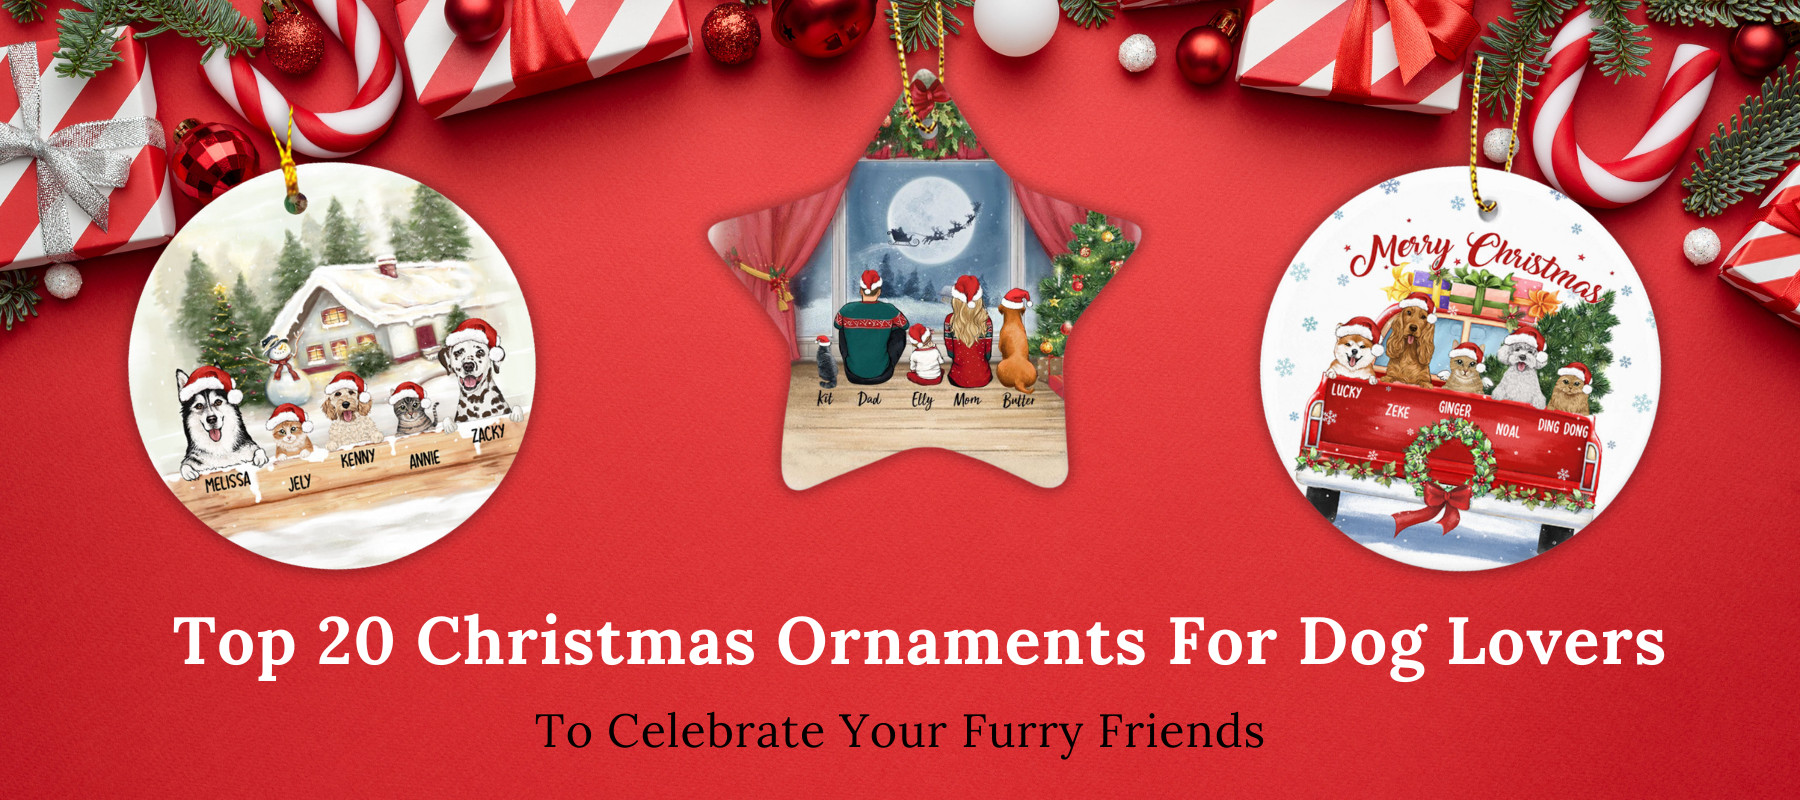 Top 20 Christmas Ornaments For Dog Lovers To Celebrate Your Furry Friends